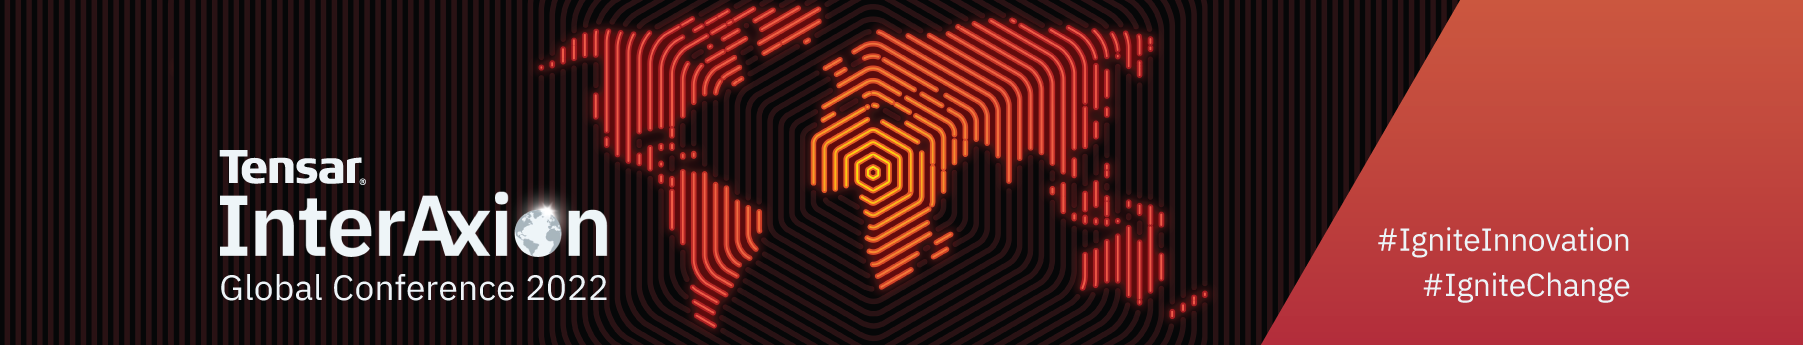 horizontal banner of the globe, with land in red and ocean in black; textured hexagons overlay the imagery; Tensar InterAxion Global Conference 2022